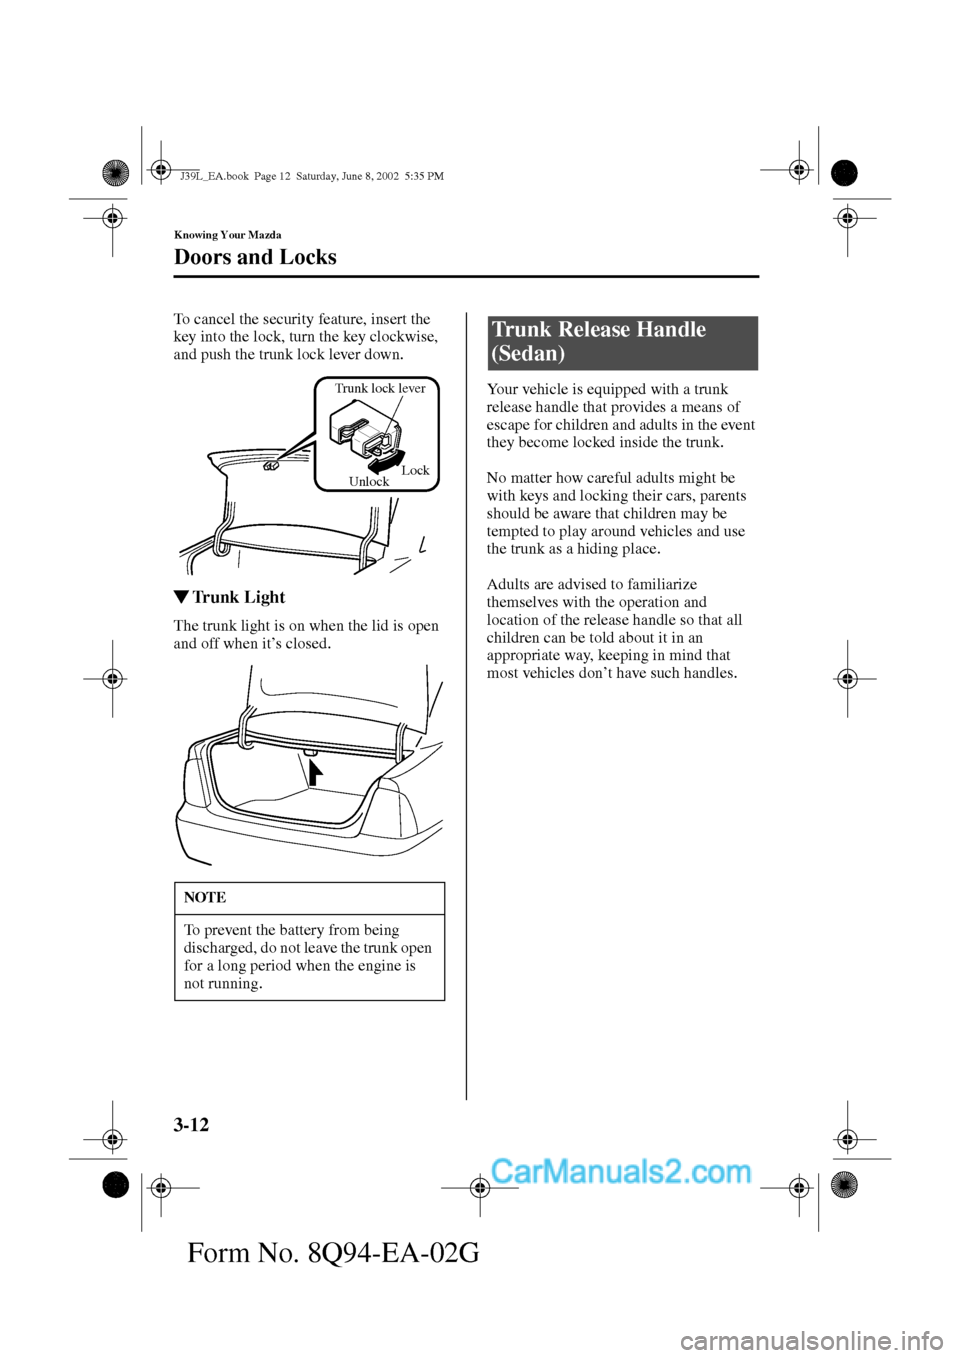 MAZDA MODEL PROTÉGÉ 2003  Owners Manual (in English) 3-12
Knowing Your Mazda
Doors and Locks
Form No. 8Q94-EA-02G
To cancel the security feature, insert the 
key into the lock, turn the key clockwise, 
and push the trunk lock lever down.  
Trunk Light
